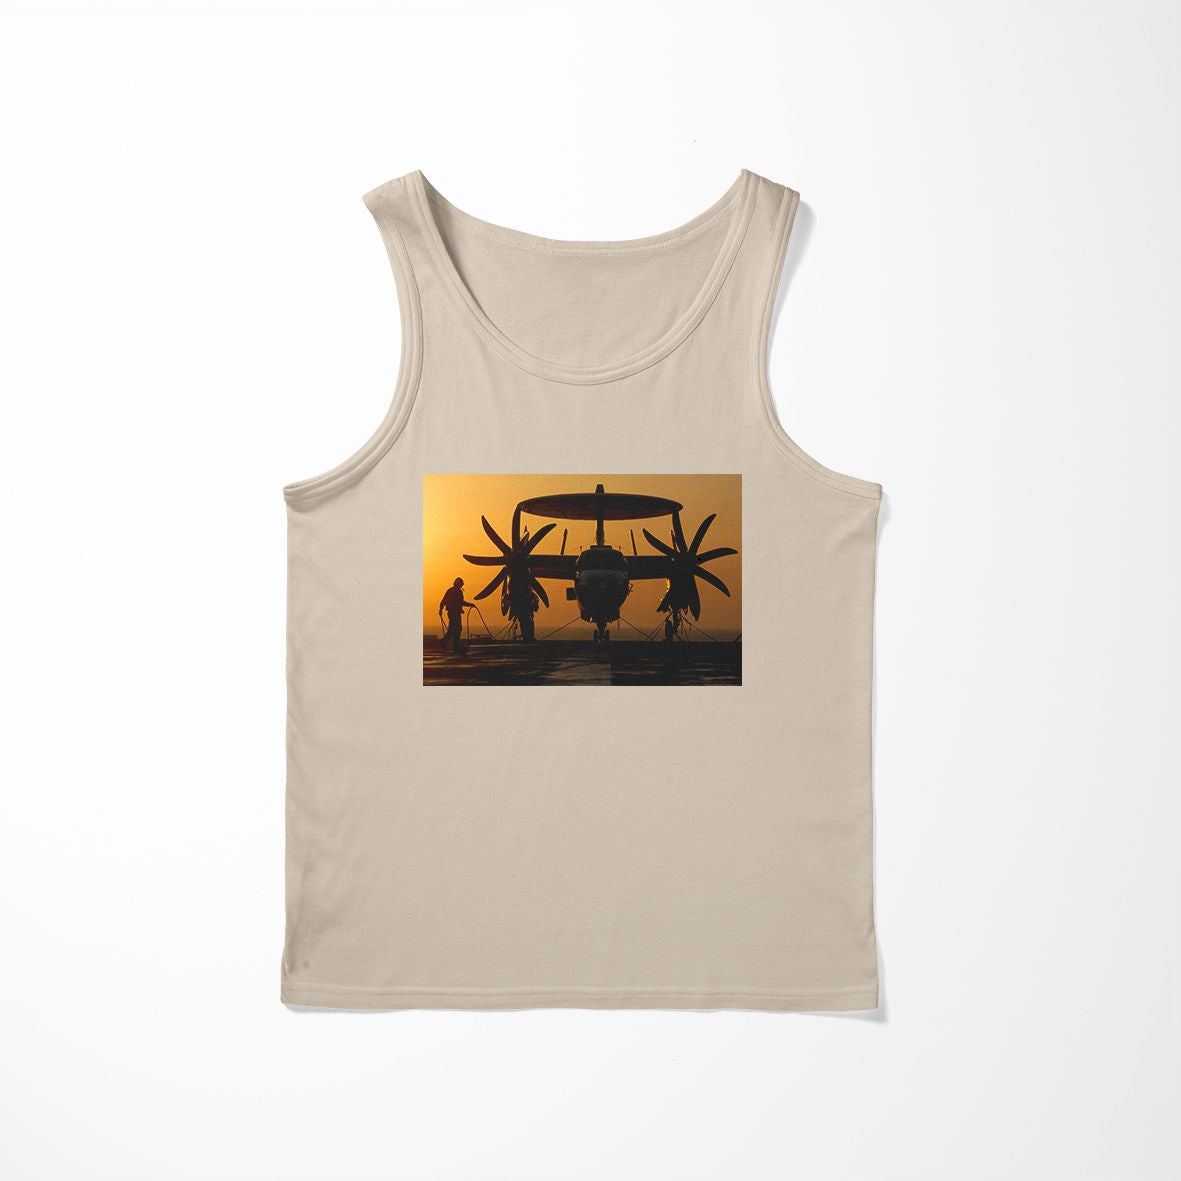 Military Plane at Sunset Designed Tank Tops